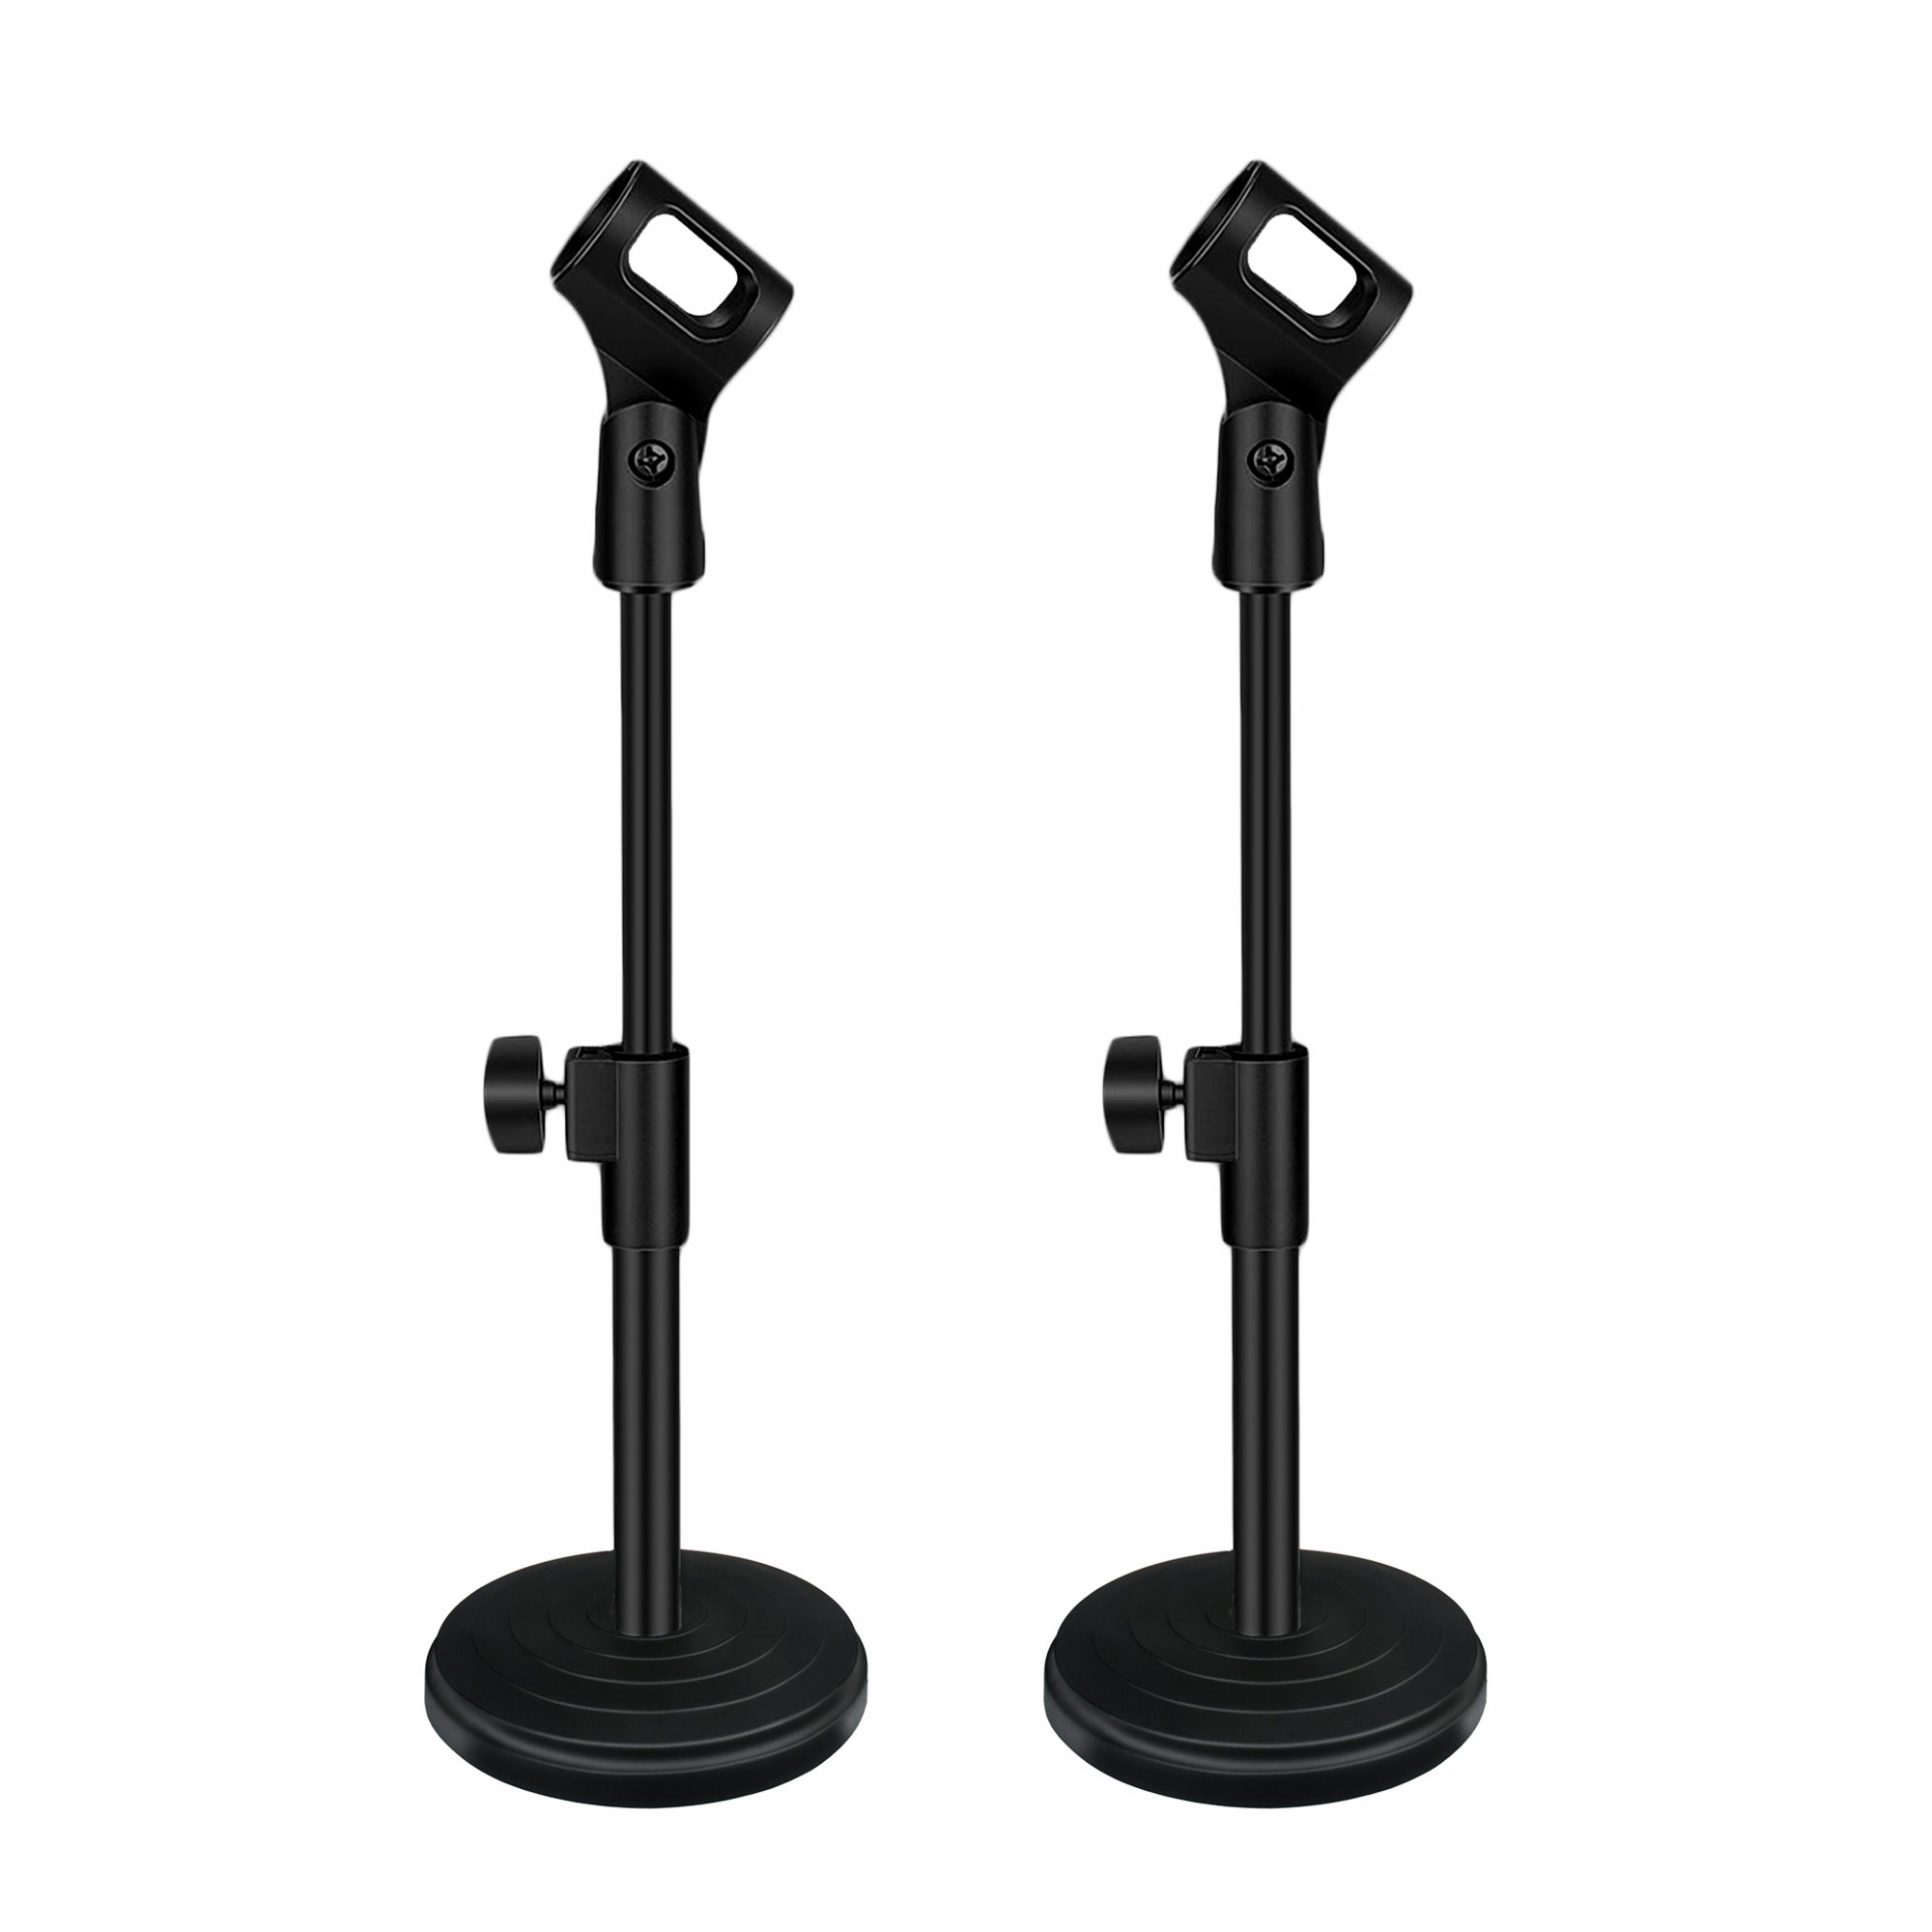 5 Core Universal Small Desktop Microphone Stand 2 Pieces Black Height Adjustable Tabletop Mic Stand For Dynamic Wired Microphone Like Samson Q2U Shure SM58 SM57 PGA48 PGA58 - MS RBS BOOM 2PK